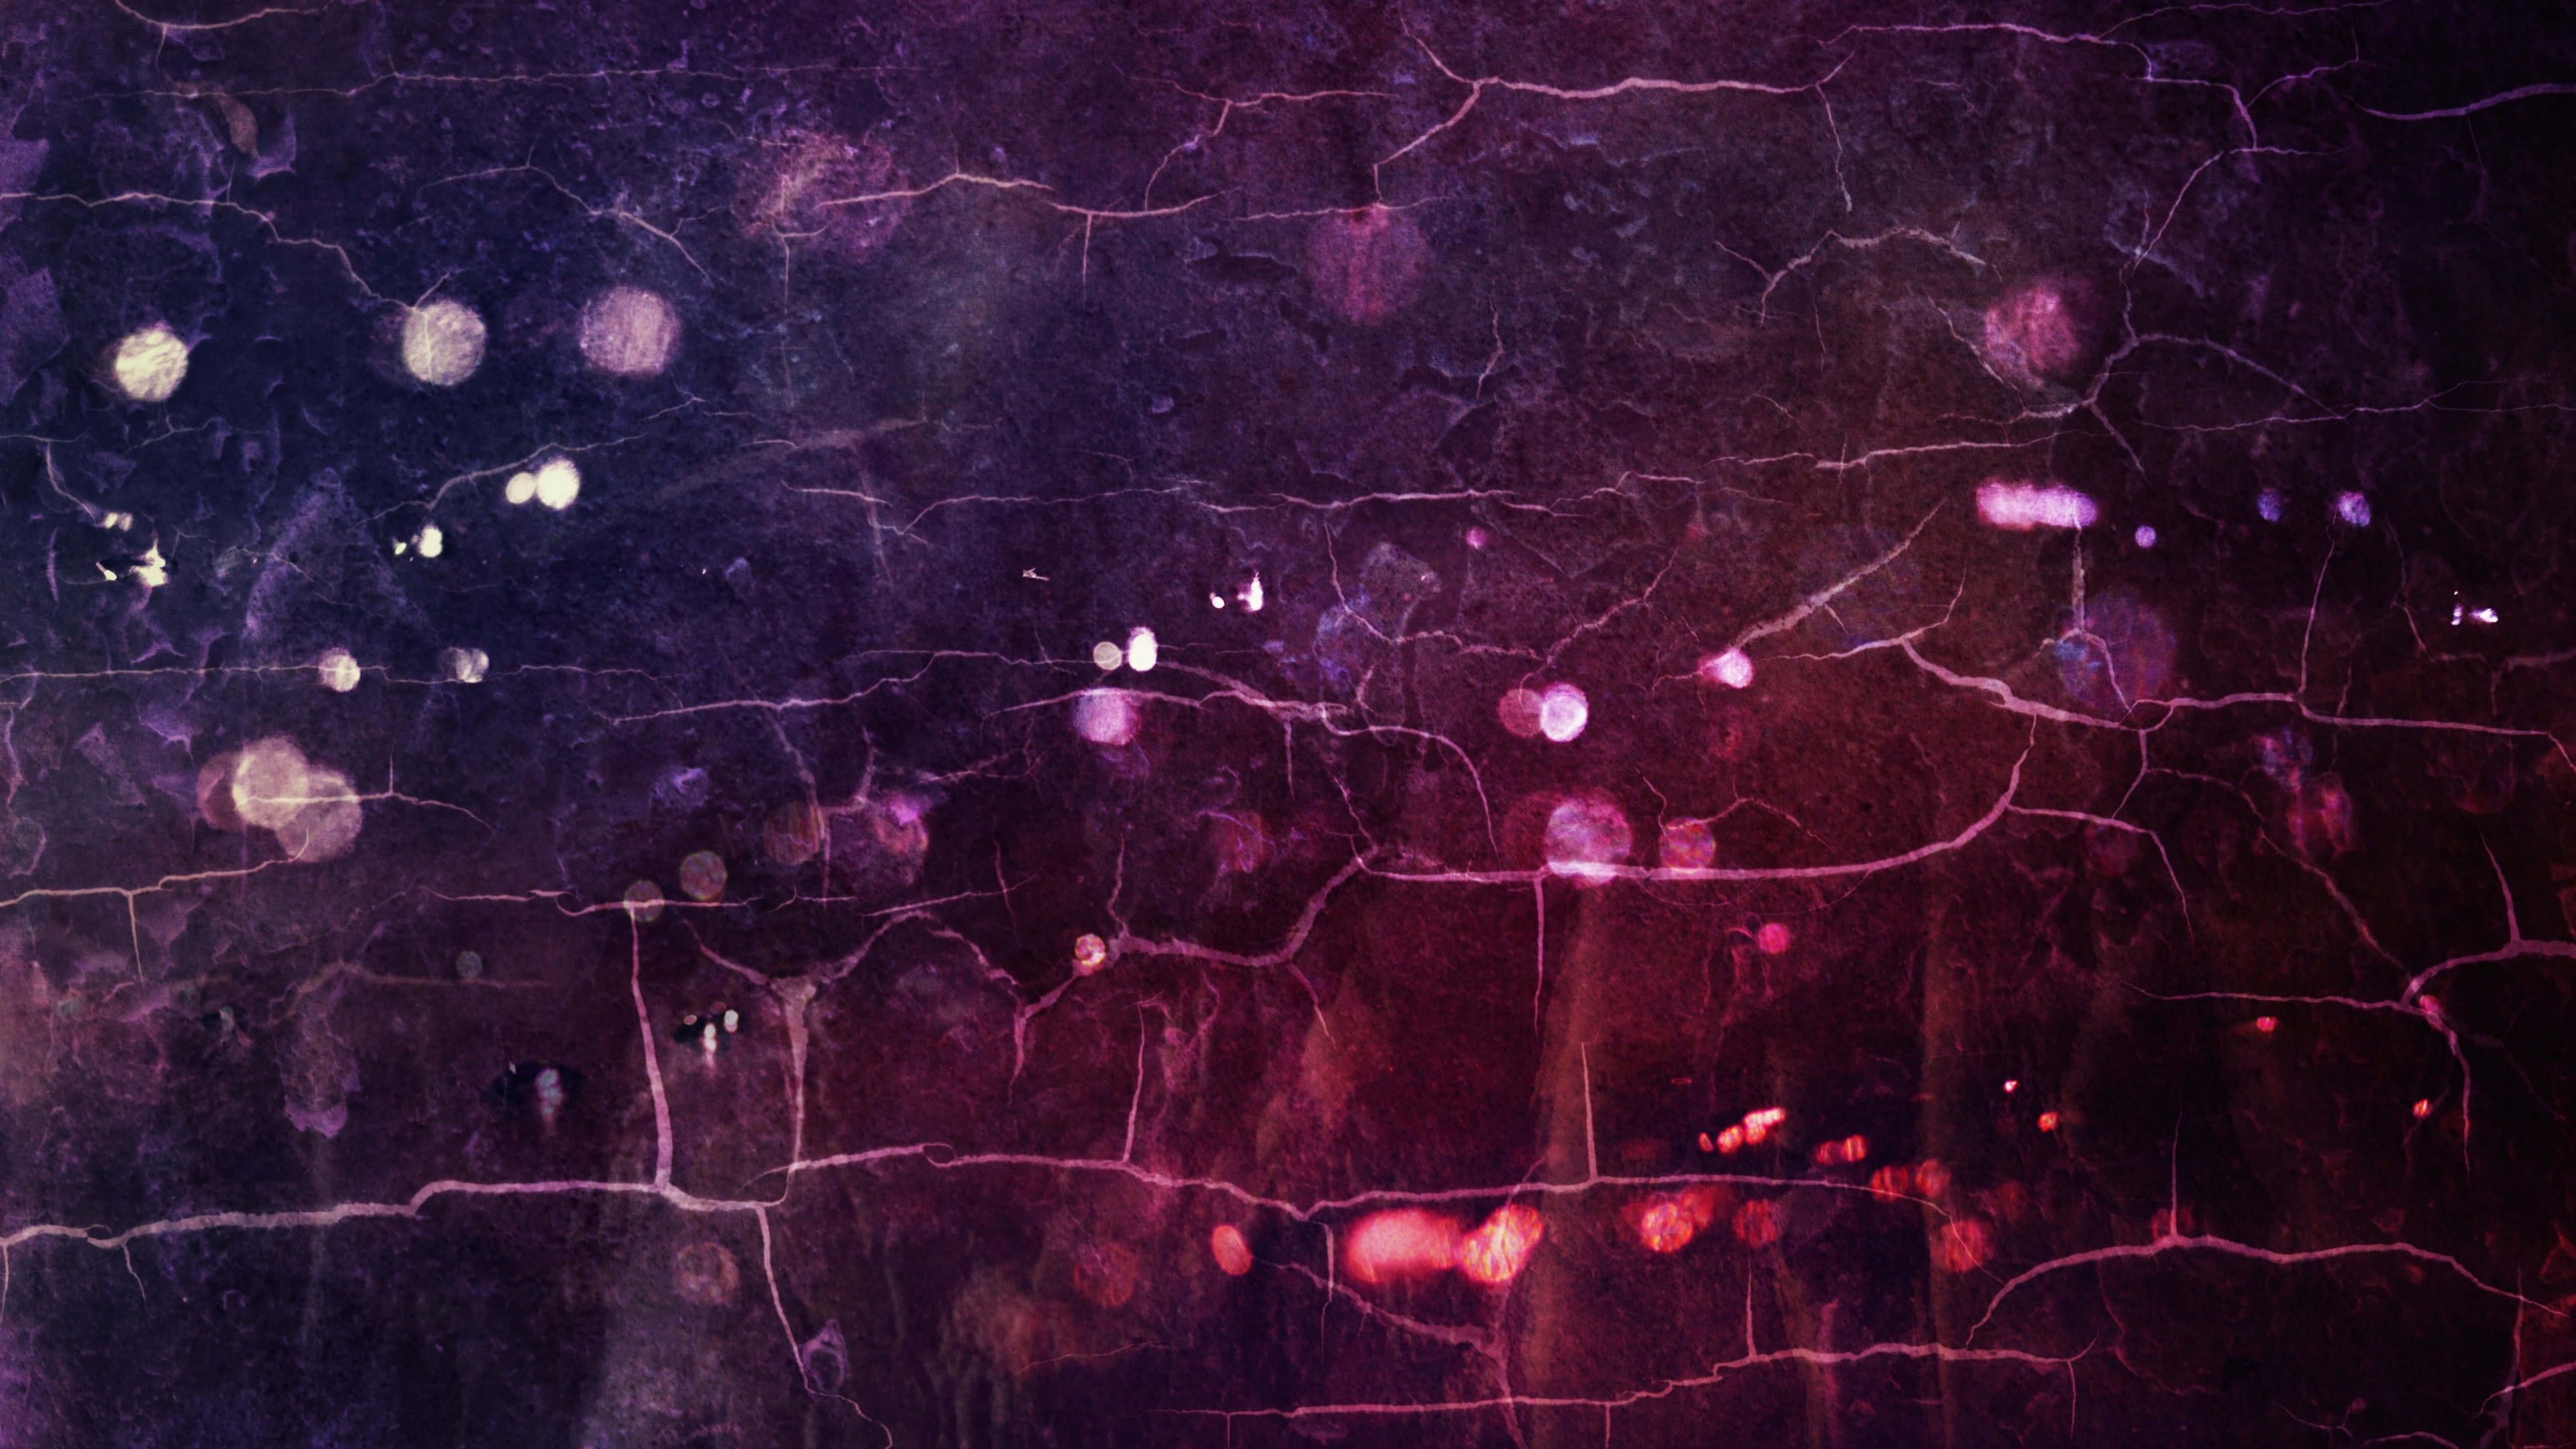 Grunge 4K wallpaper for your desktop or mobile screen free and easy to download